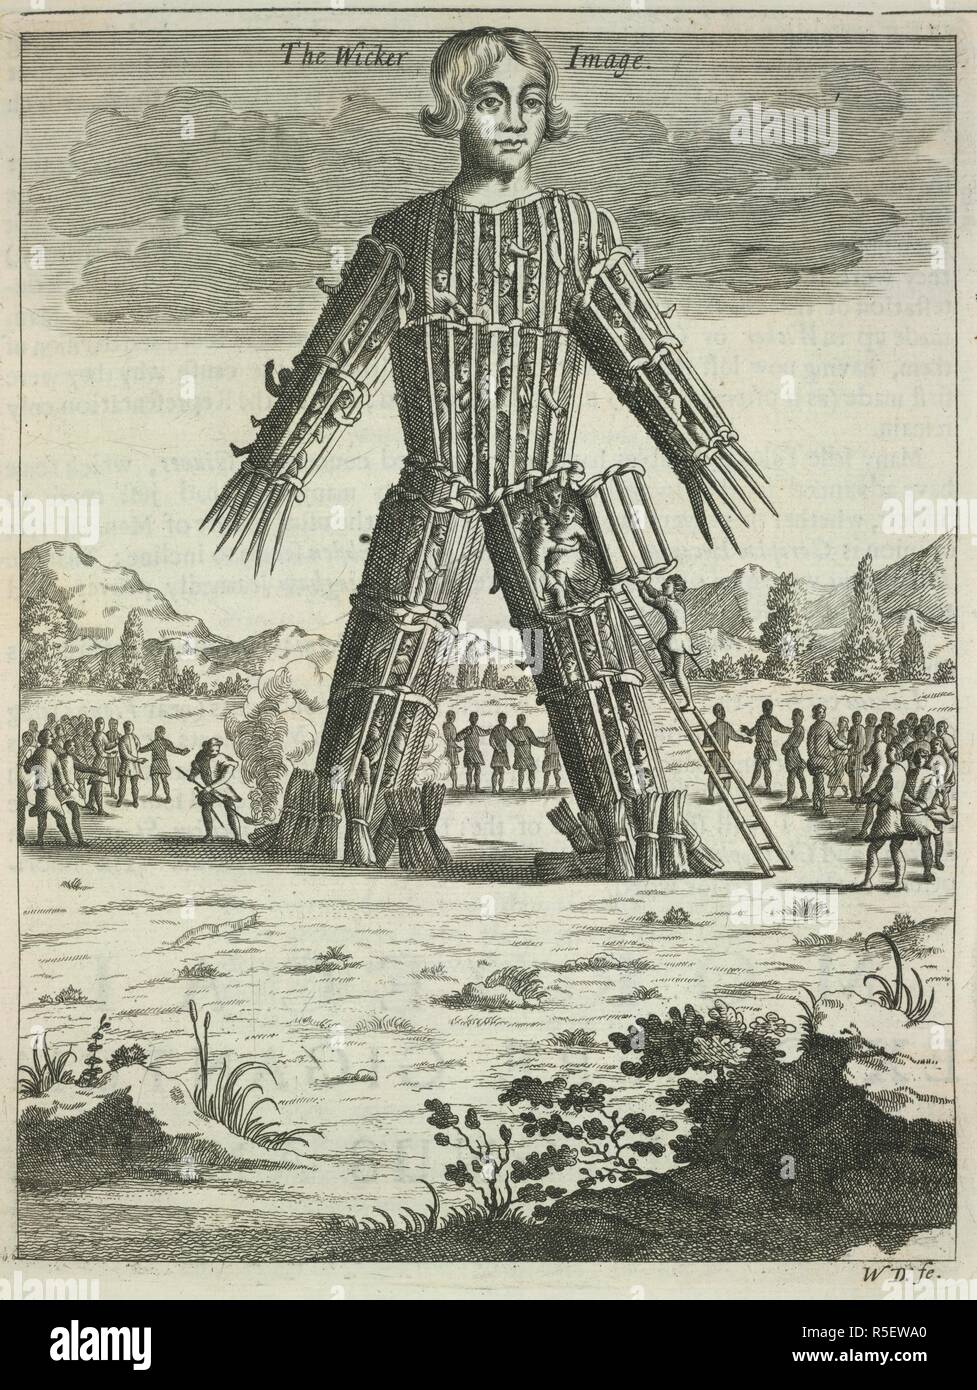 A wicker man, filled with human sacrifices, waiting to be burned. The wicker man ritual was described by Julius Caesar in Book Six of The Gallic War, in which he describes the customs of the Celts of Gaul. Britannia Antiqua Illustrata: or, the antiquities of Ancient Britain, with a chronological history of this kingdom, etc. For the author: London, 1676. Source: C.83.k.2, opposite 105. Language: English. Author: AYLETT SAMMES. Stock Photo